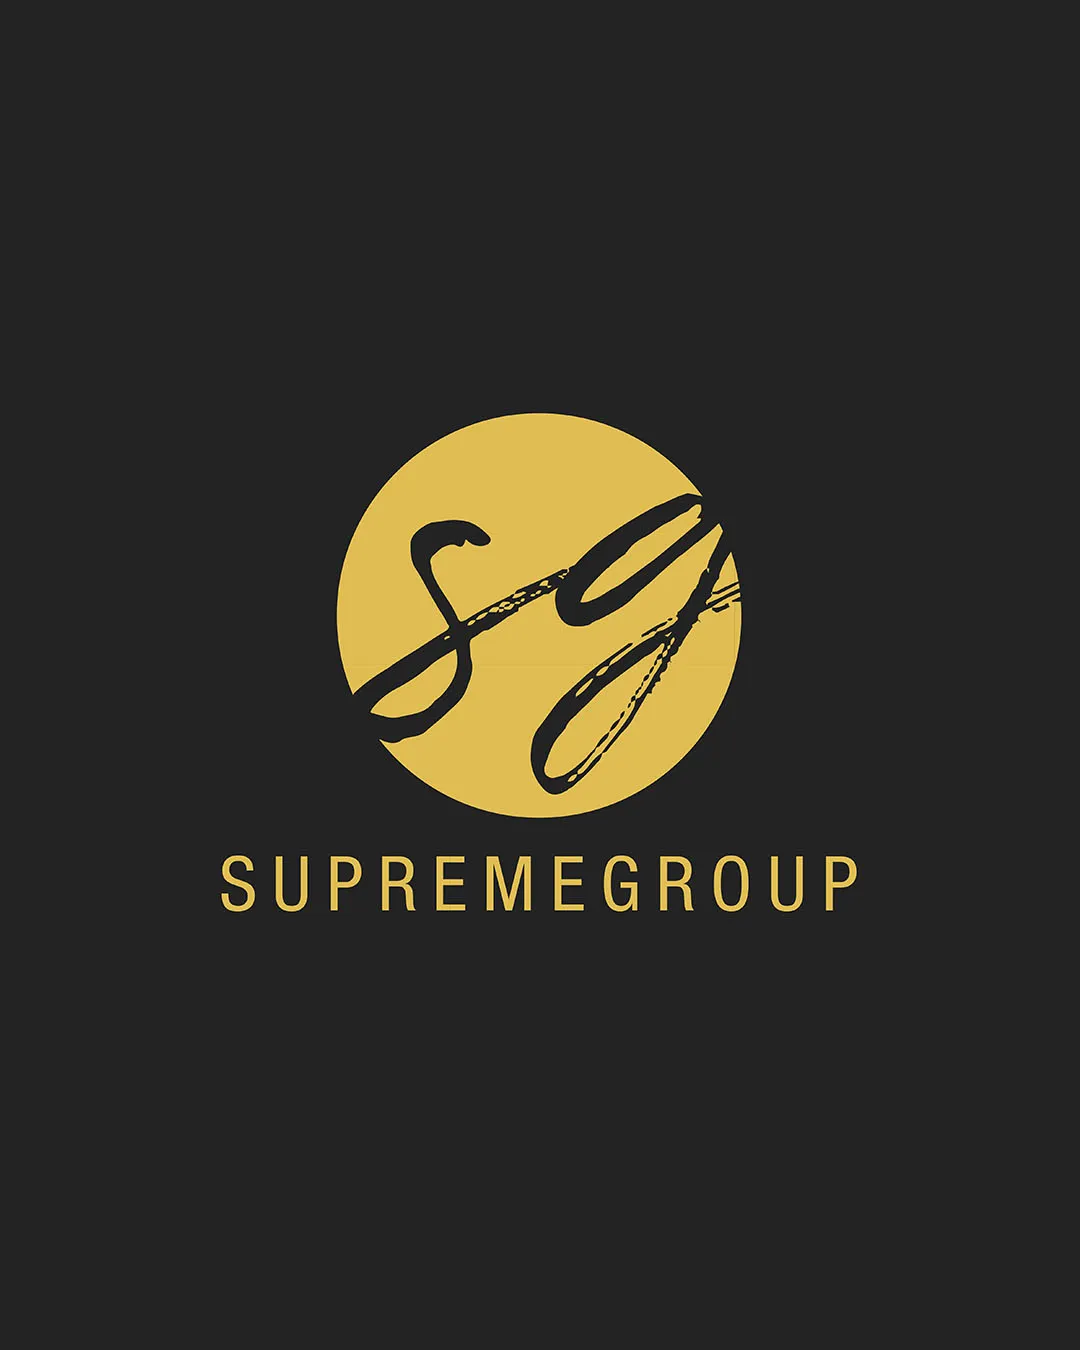 The Supremegroup logo, which is gold on black